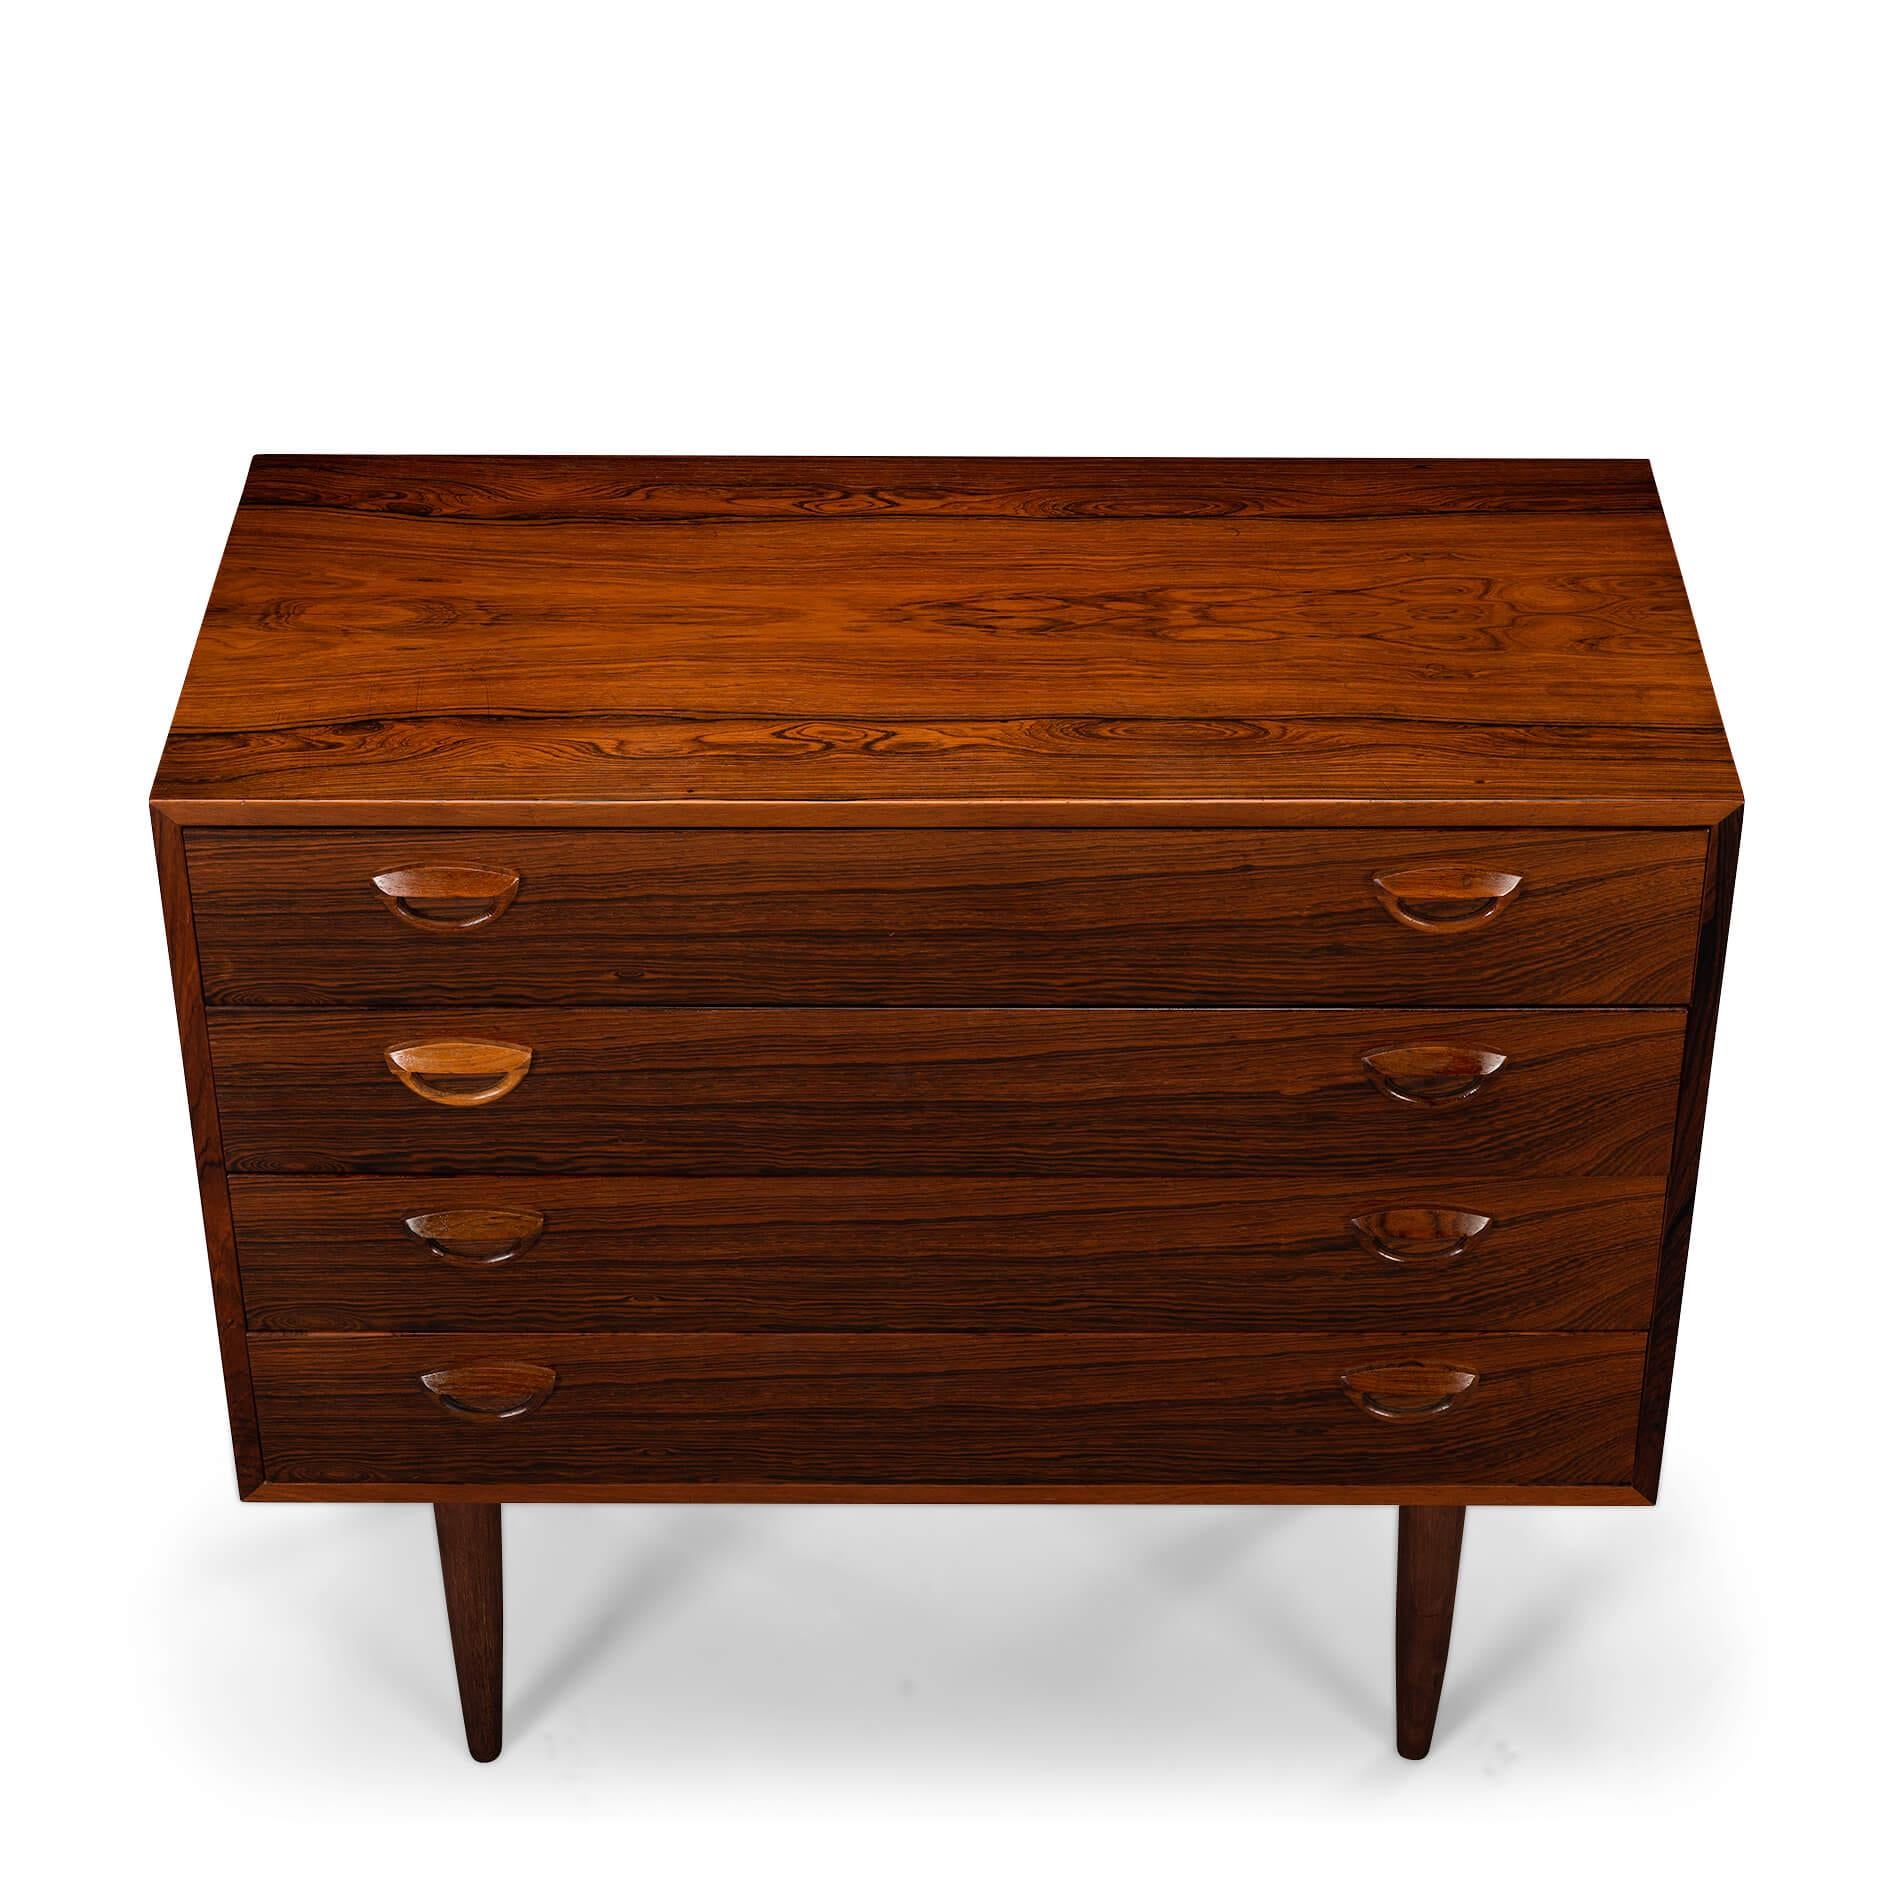 Danish Design by Kai Kristiansen This stylish big chest of drawers was designed by Kai Kristiansen and produced by Feldballes Møbelfabrik in the 1960s. This cabinet is made of rosewood and has beautiful detailed lines with his signature eyelid